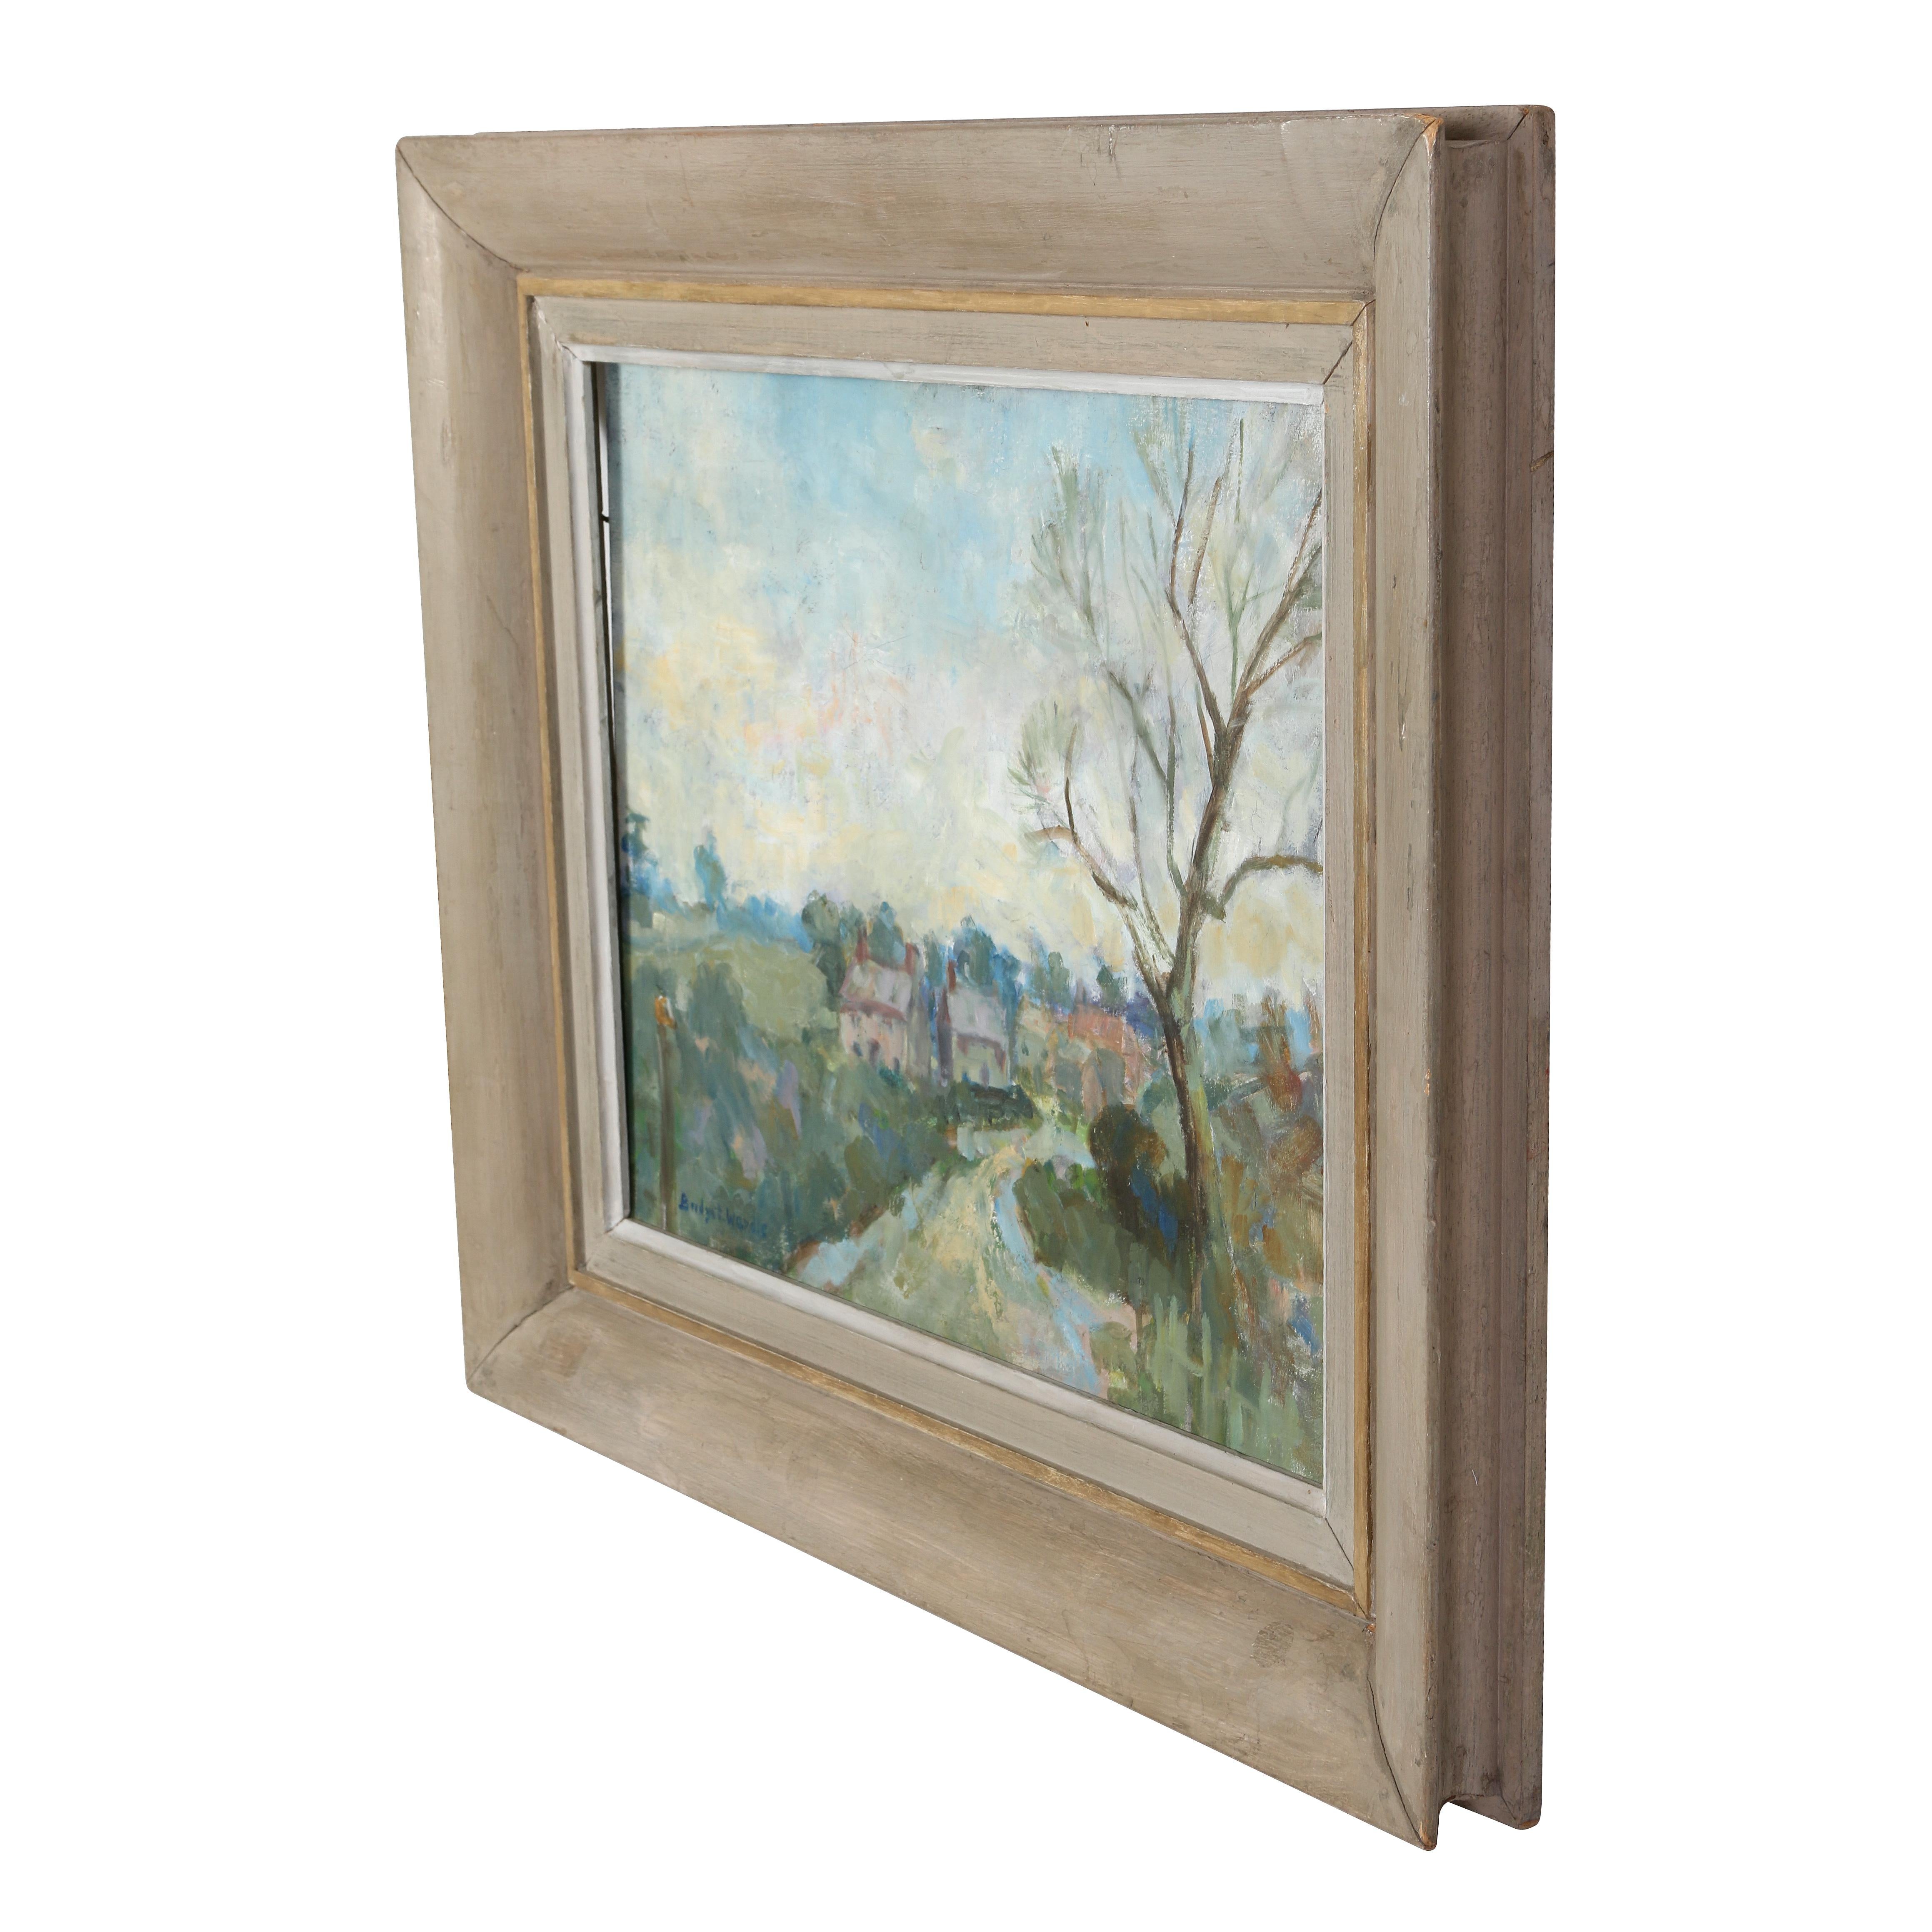 It was love at first sight with this lovely little painting. Painted in oil with soft, pastel colors, this work depicts a charming English countryside scene. The painted frame features an inner gilt molding, a subtle but pretty detail.